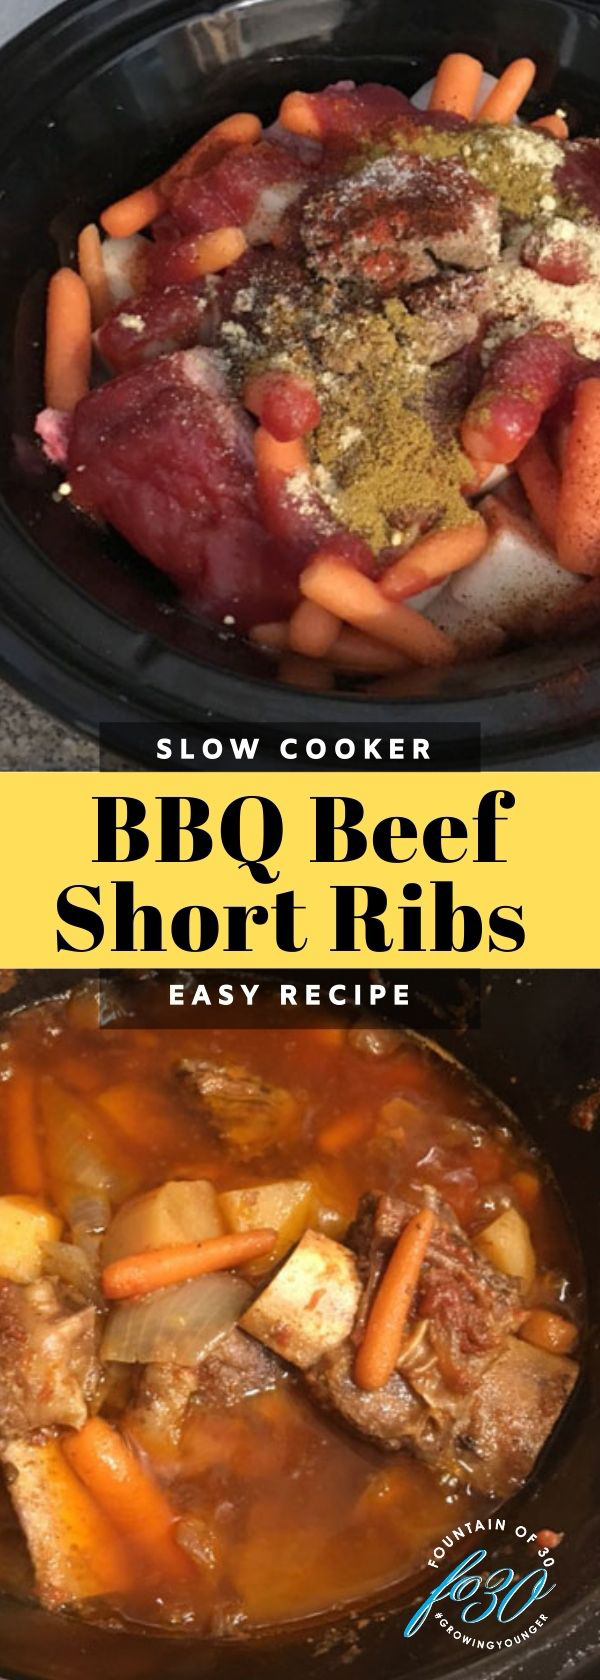 slow cooker bbq beef short ribs fountainof30